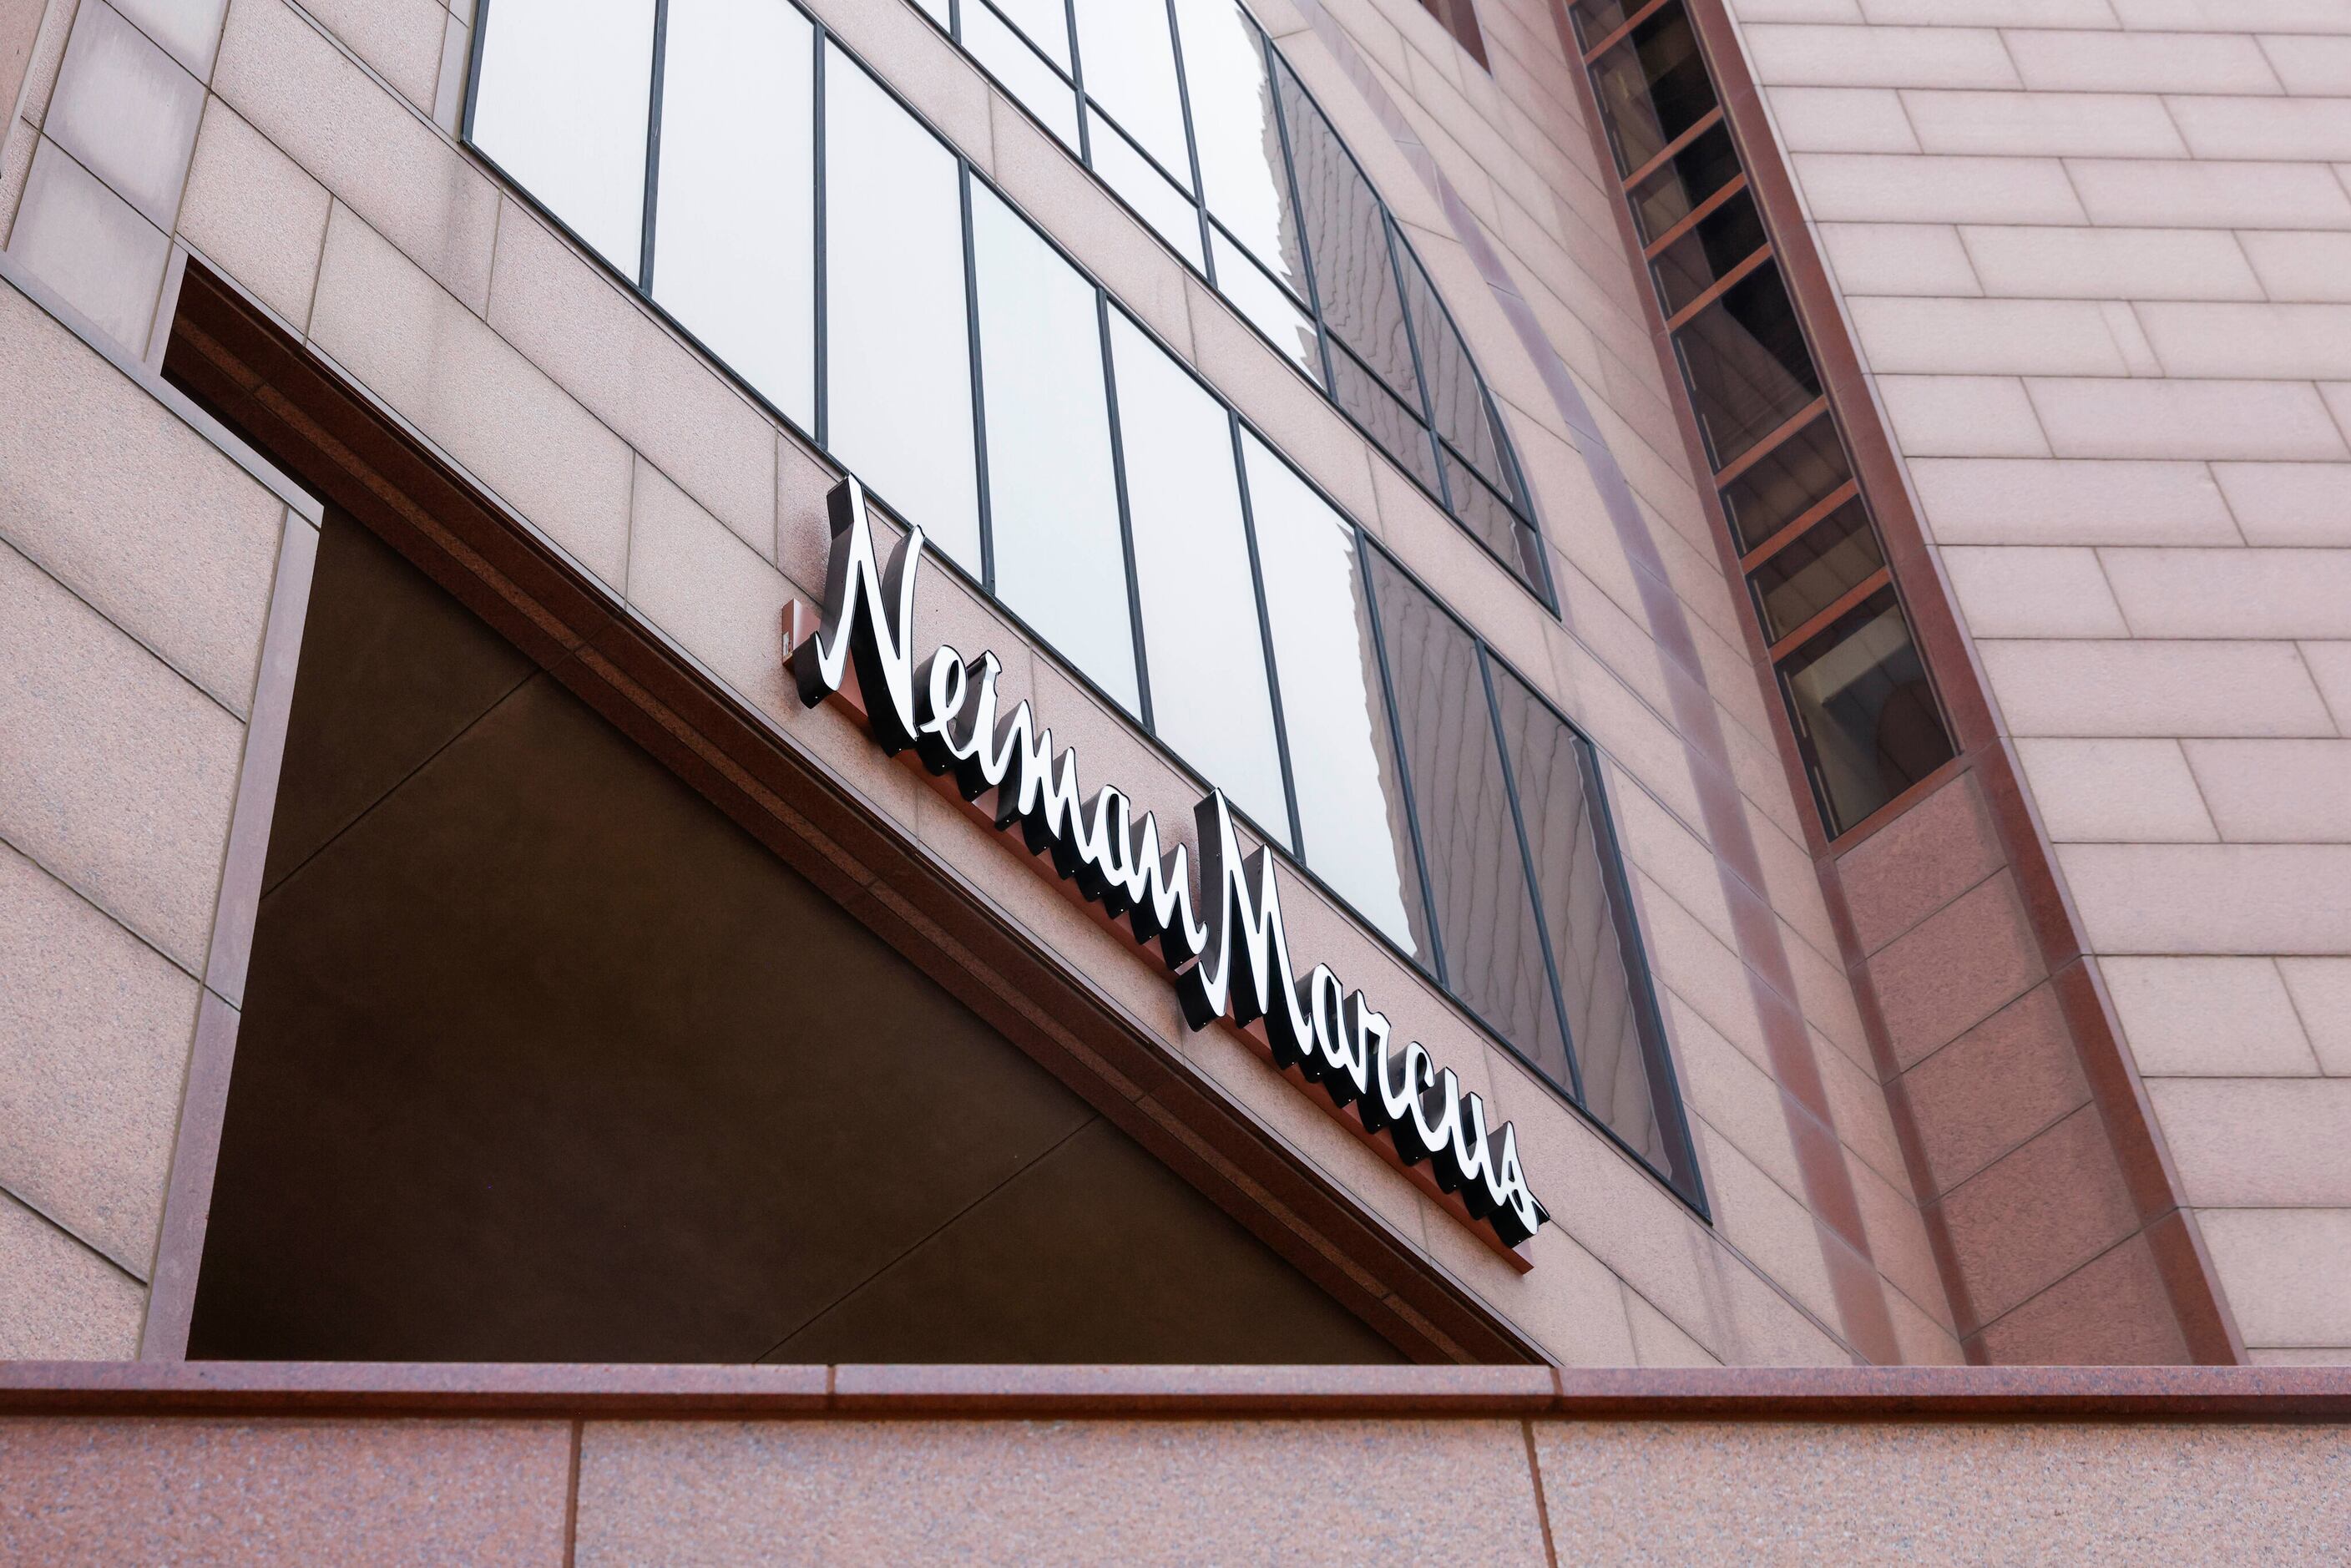 Neiman Marcus to lay off about 5% of workforce